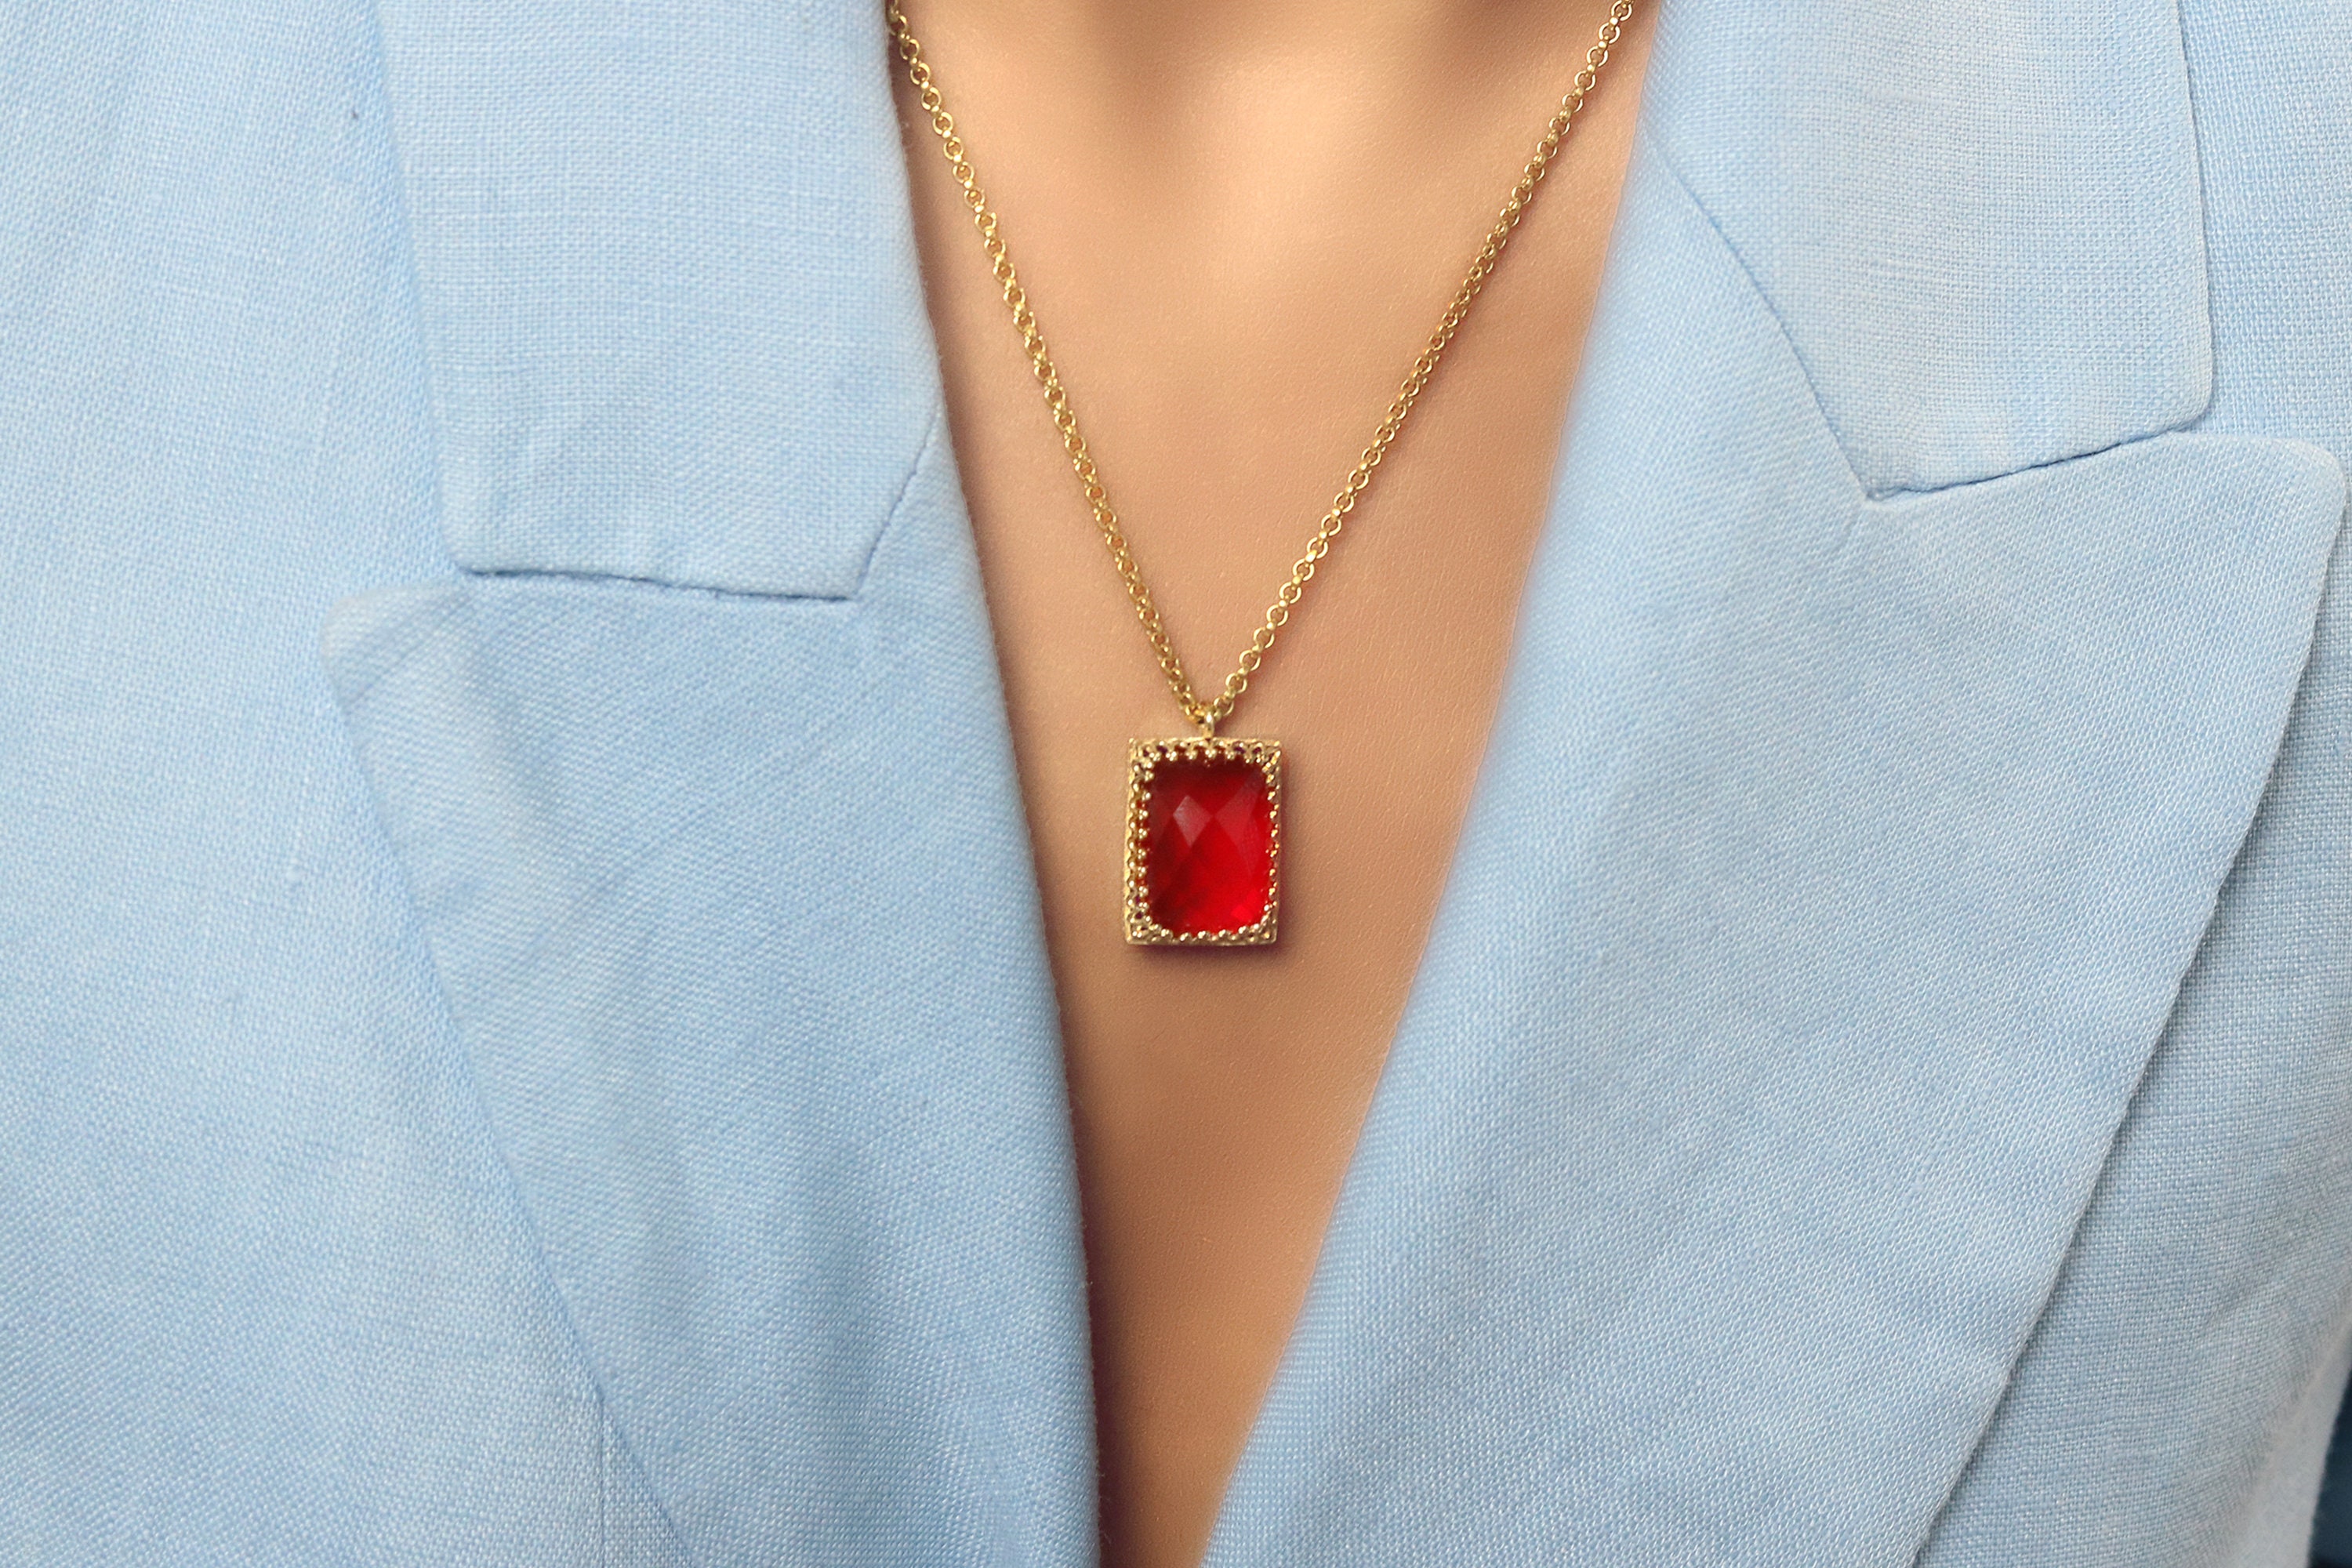 Ruby Necklace Red Ruby Coin Pendant Necklace Pink Crystal Medallion Girlfriend Gift July Birthstone Gold Filled Box Chain Christmas Gifts Sieraden Kettingen Kristallen kettingen 